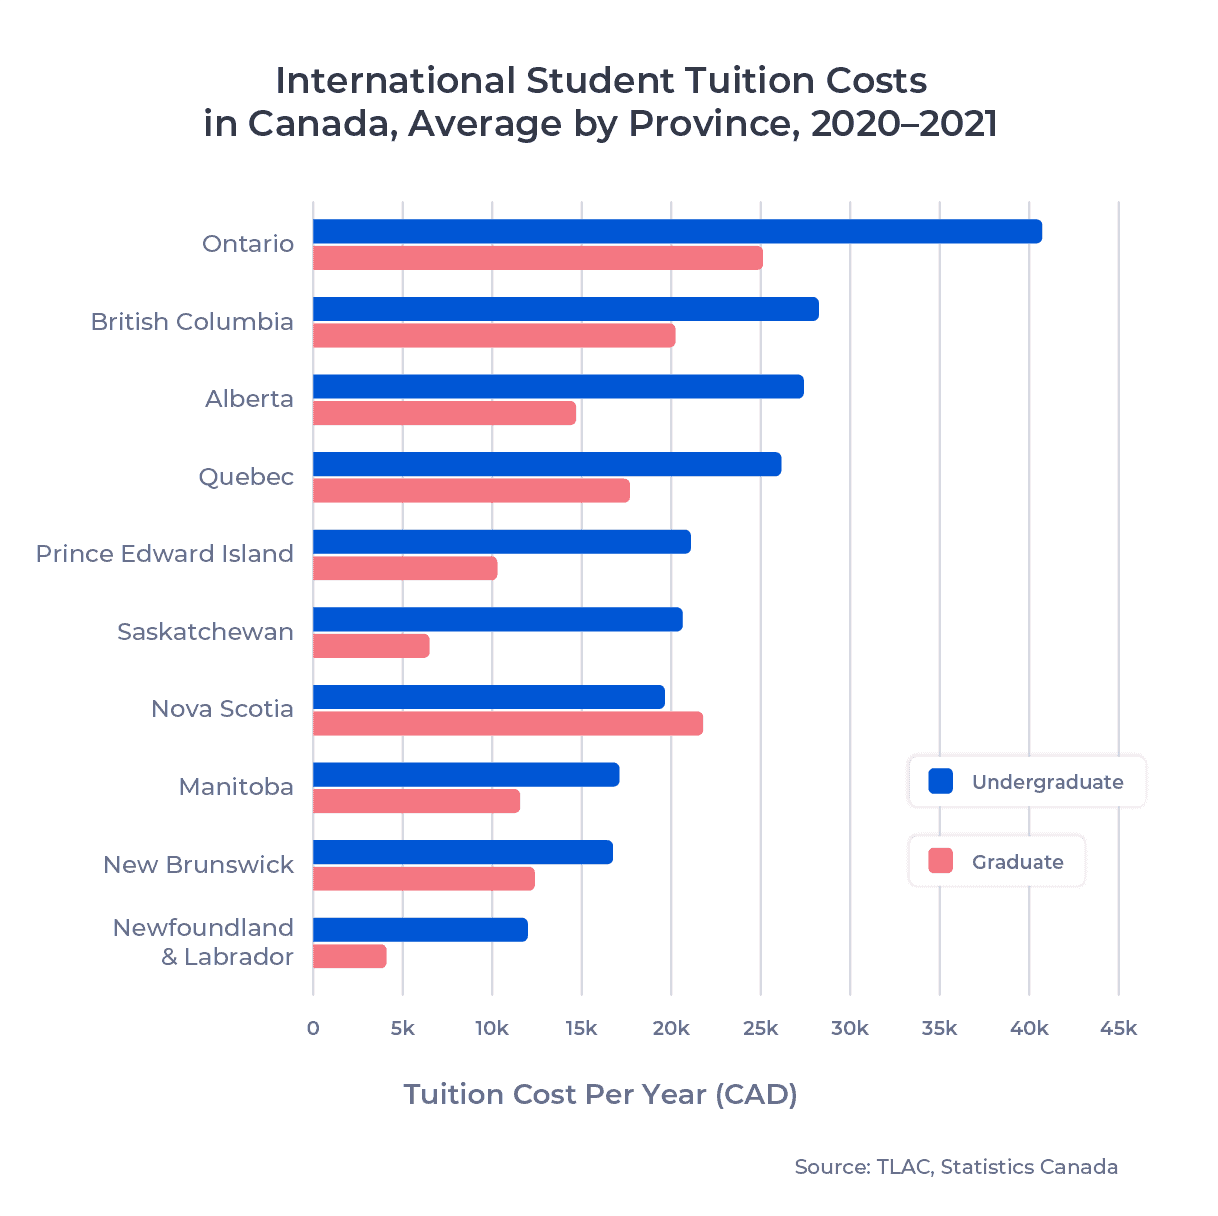 Bar chart of International Student Tuition Costs in Canada, Average by Province, 2020/21